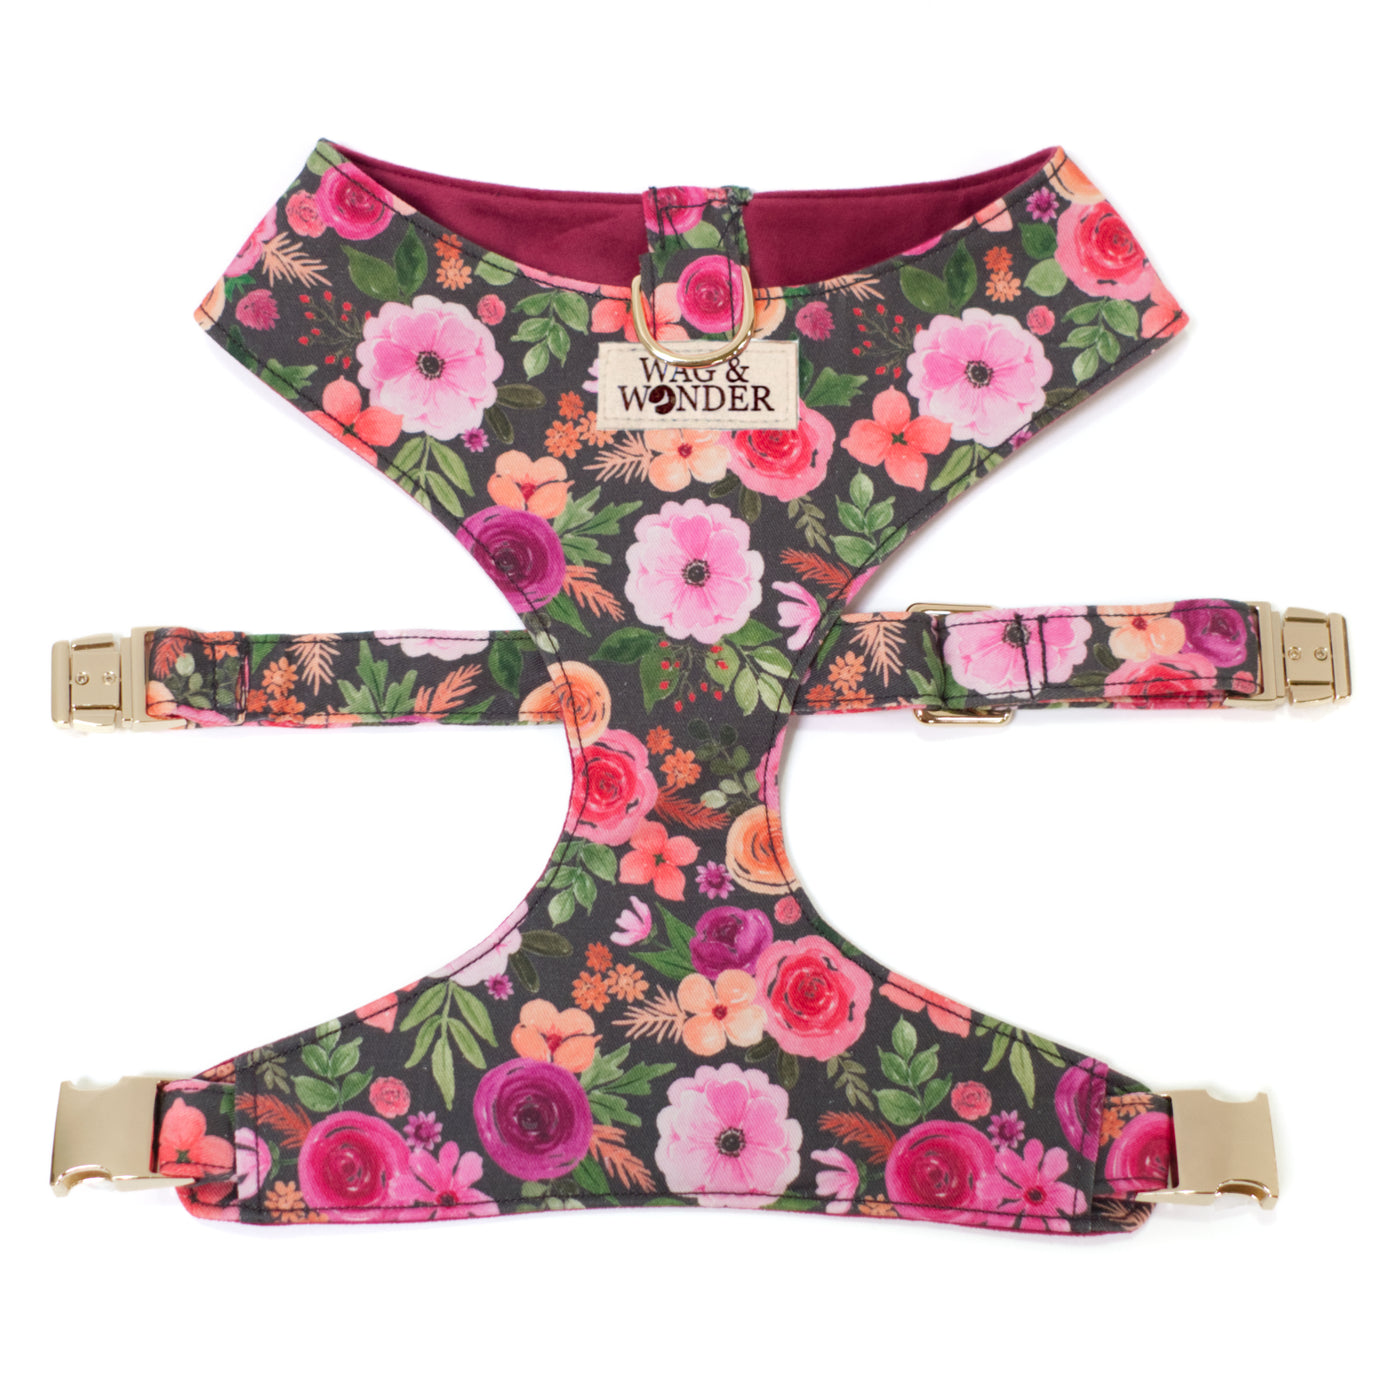 Watercolor floral dog harness in shades of pink, purple and coral with gold hardware